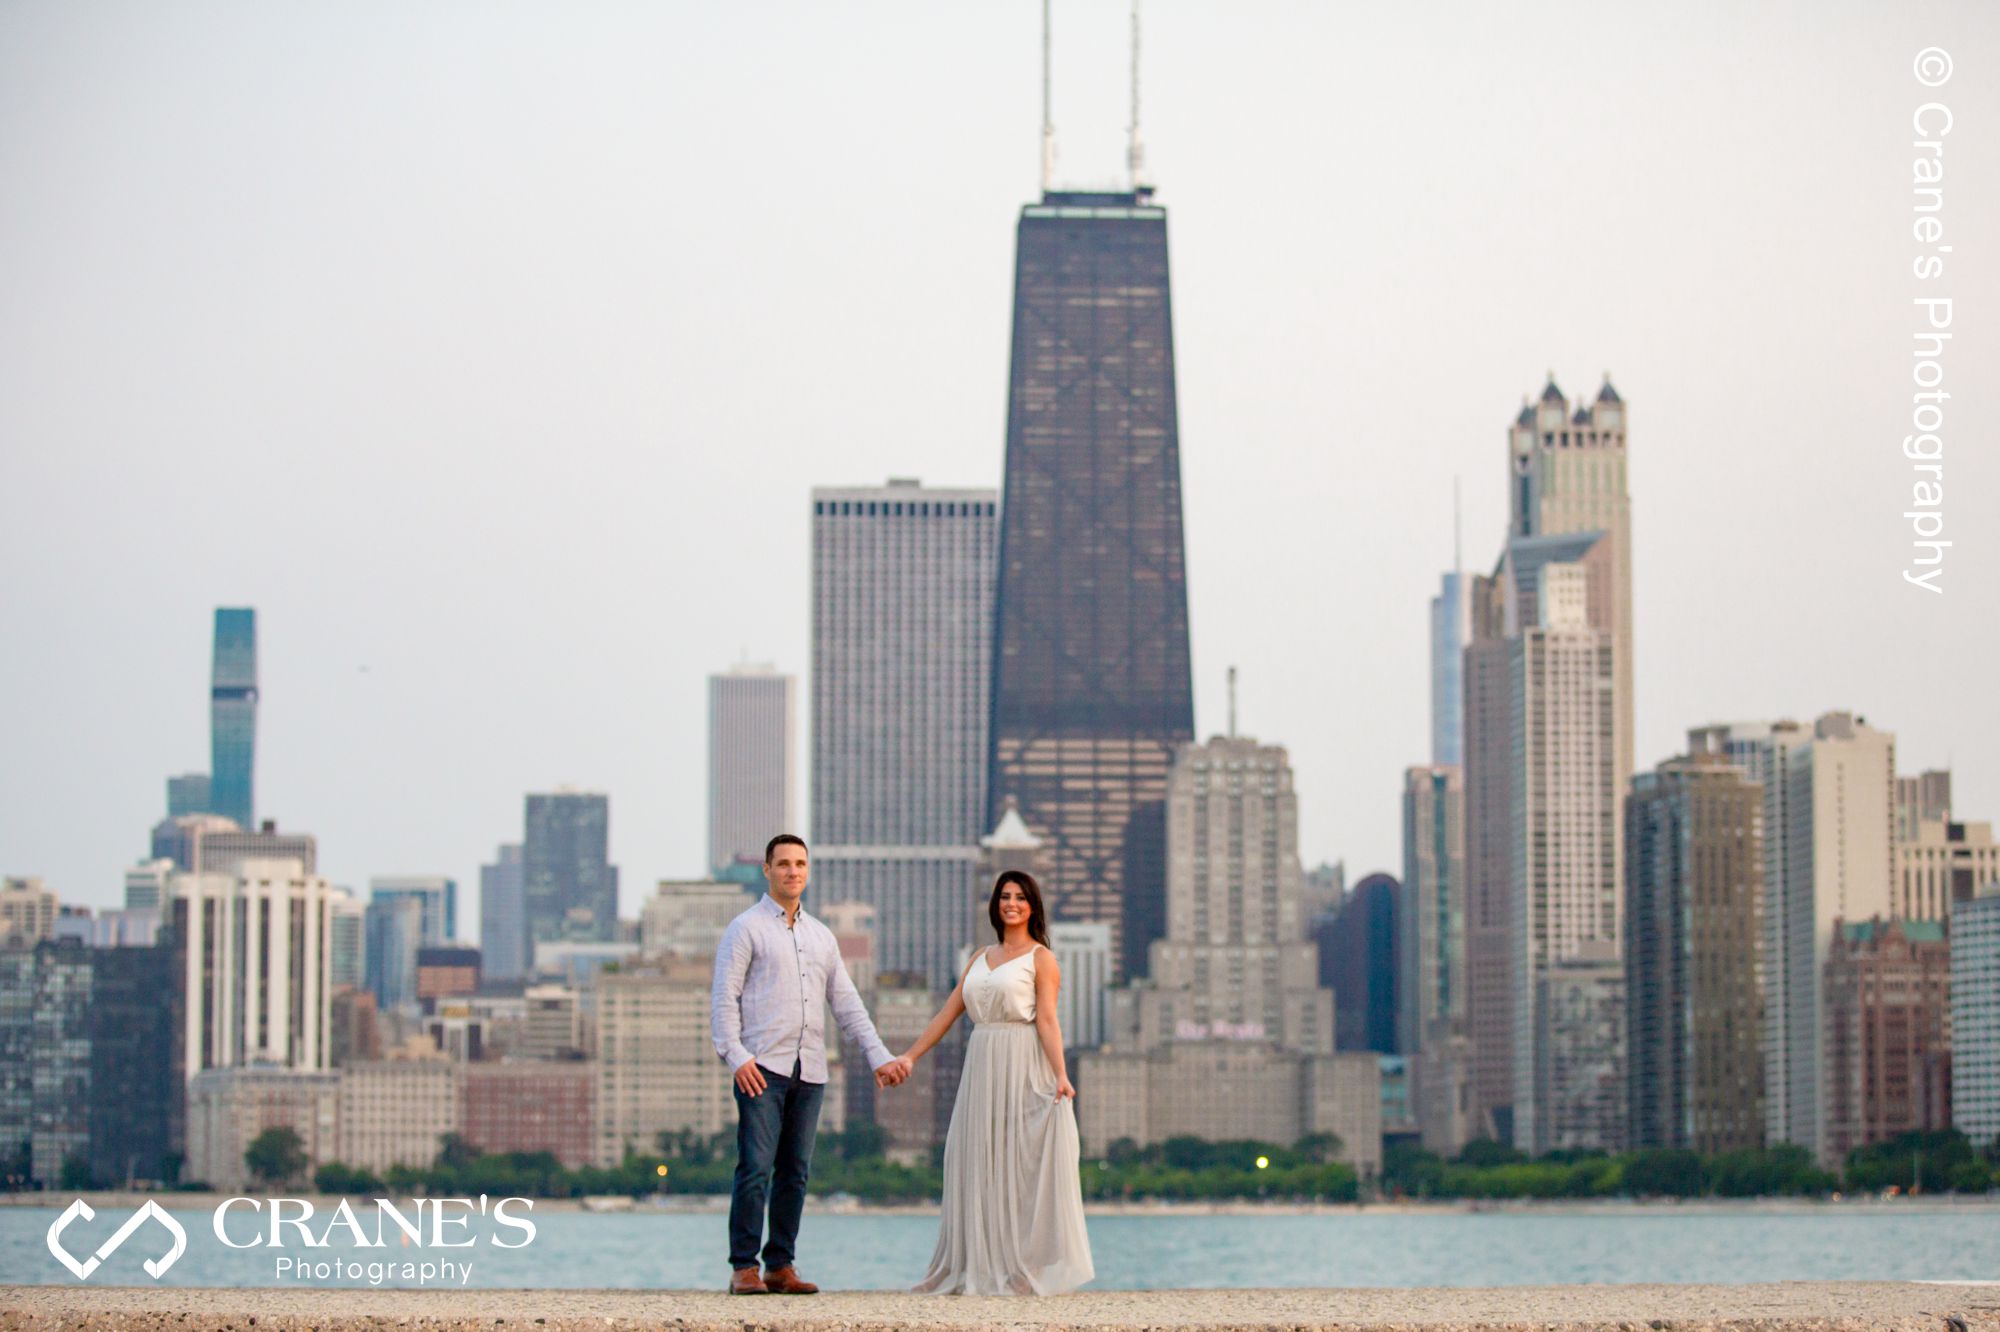 A panoramic engagement session photo taken at North Ave beach with the city in background.